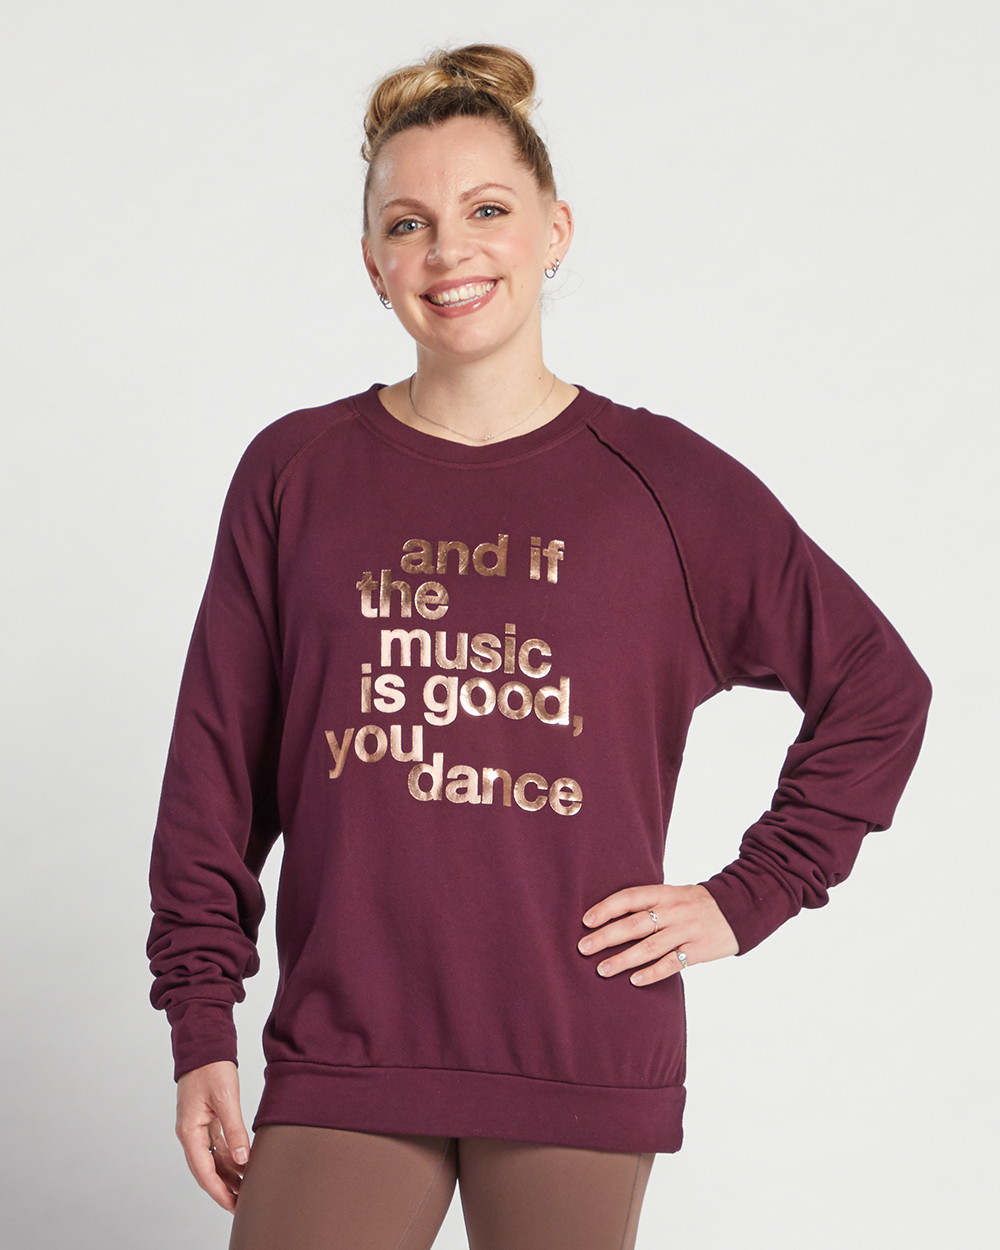 HMF this Jazzercise sweatshirt. It will complete my life. : r